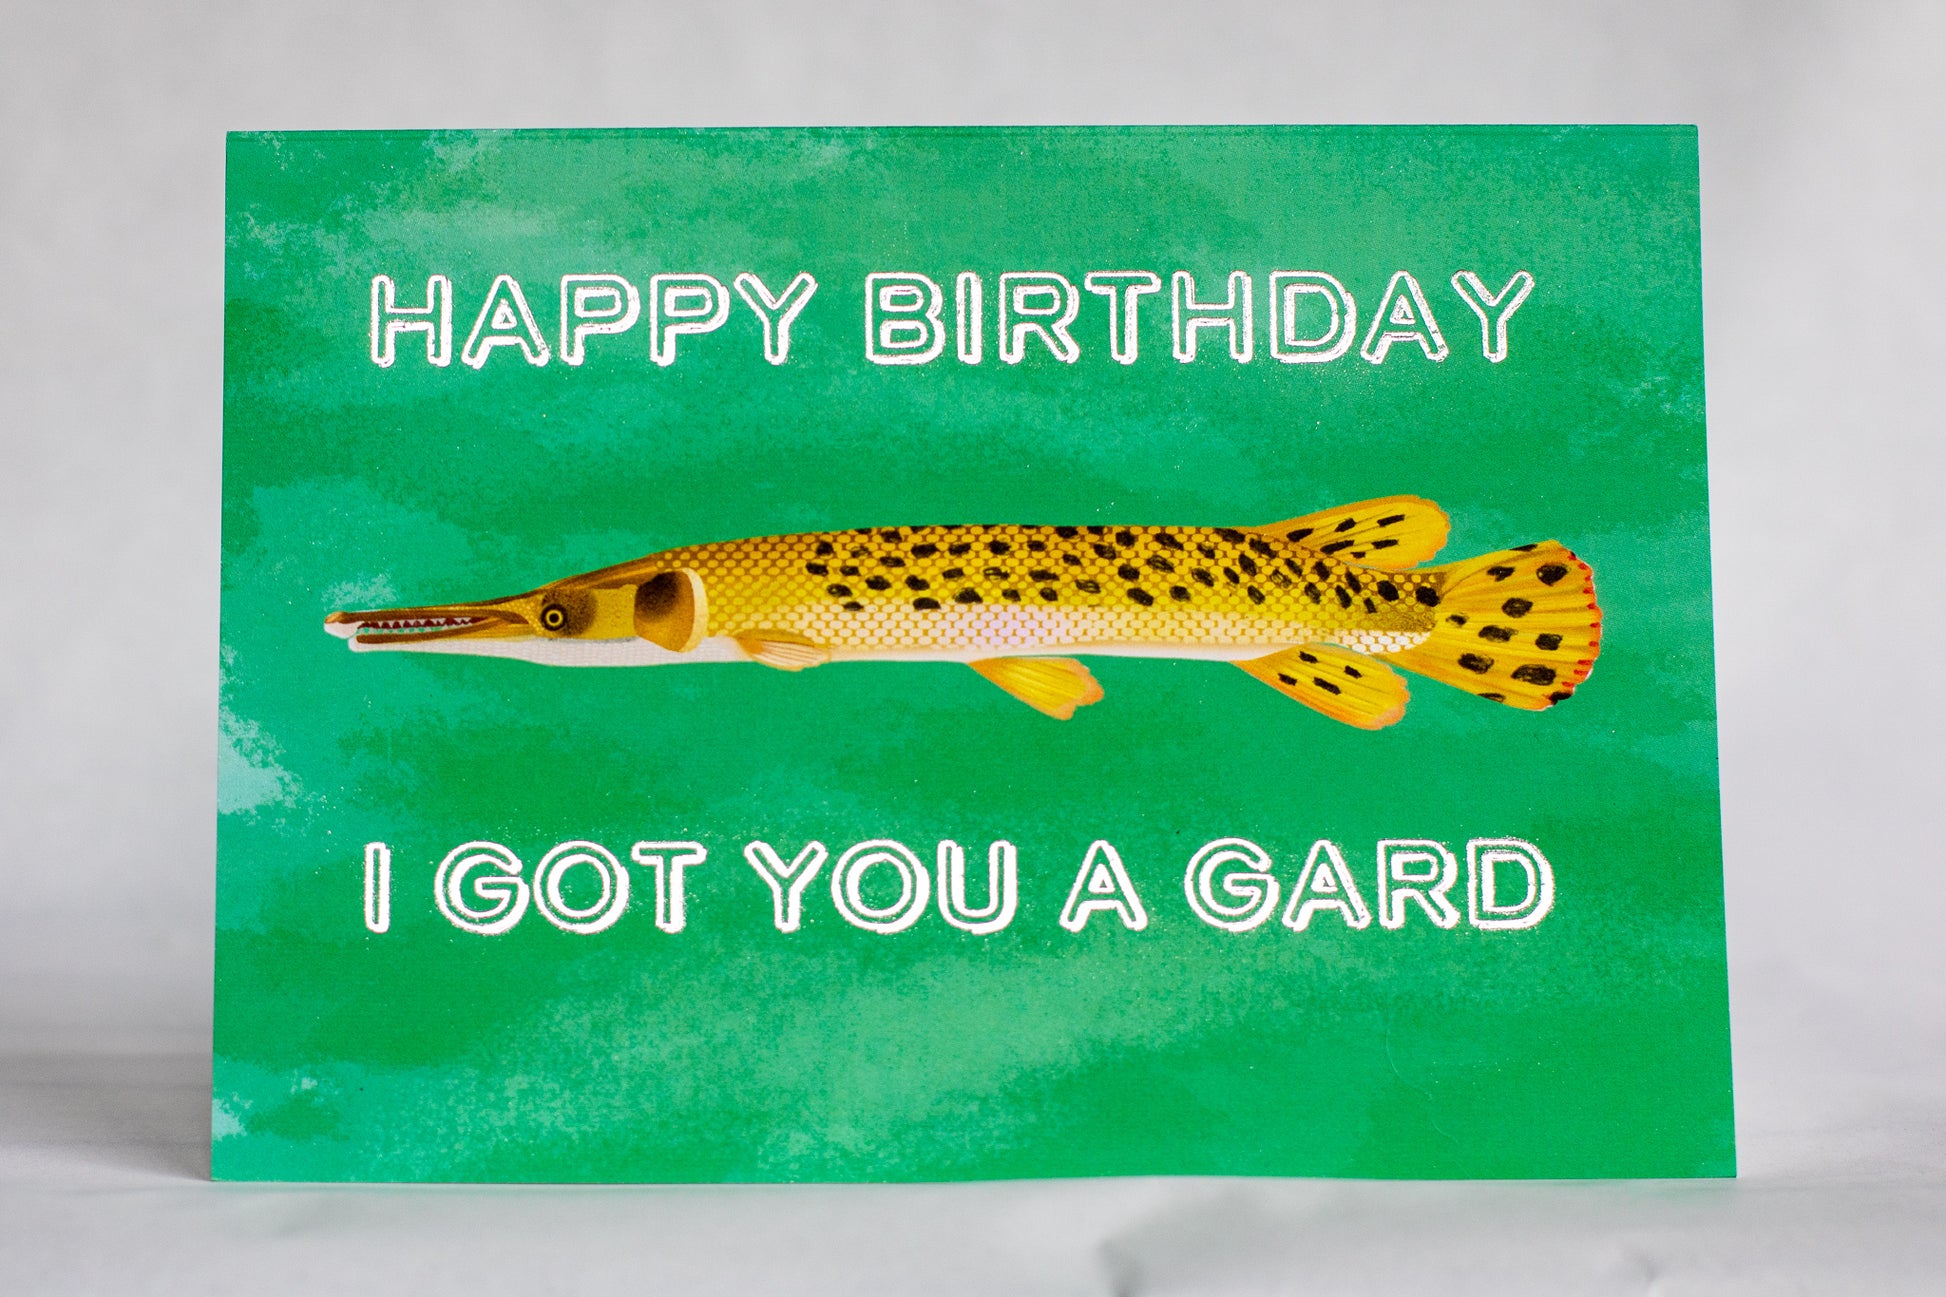 Here's wishing you a Happy Birthday! We hope you live to fish